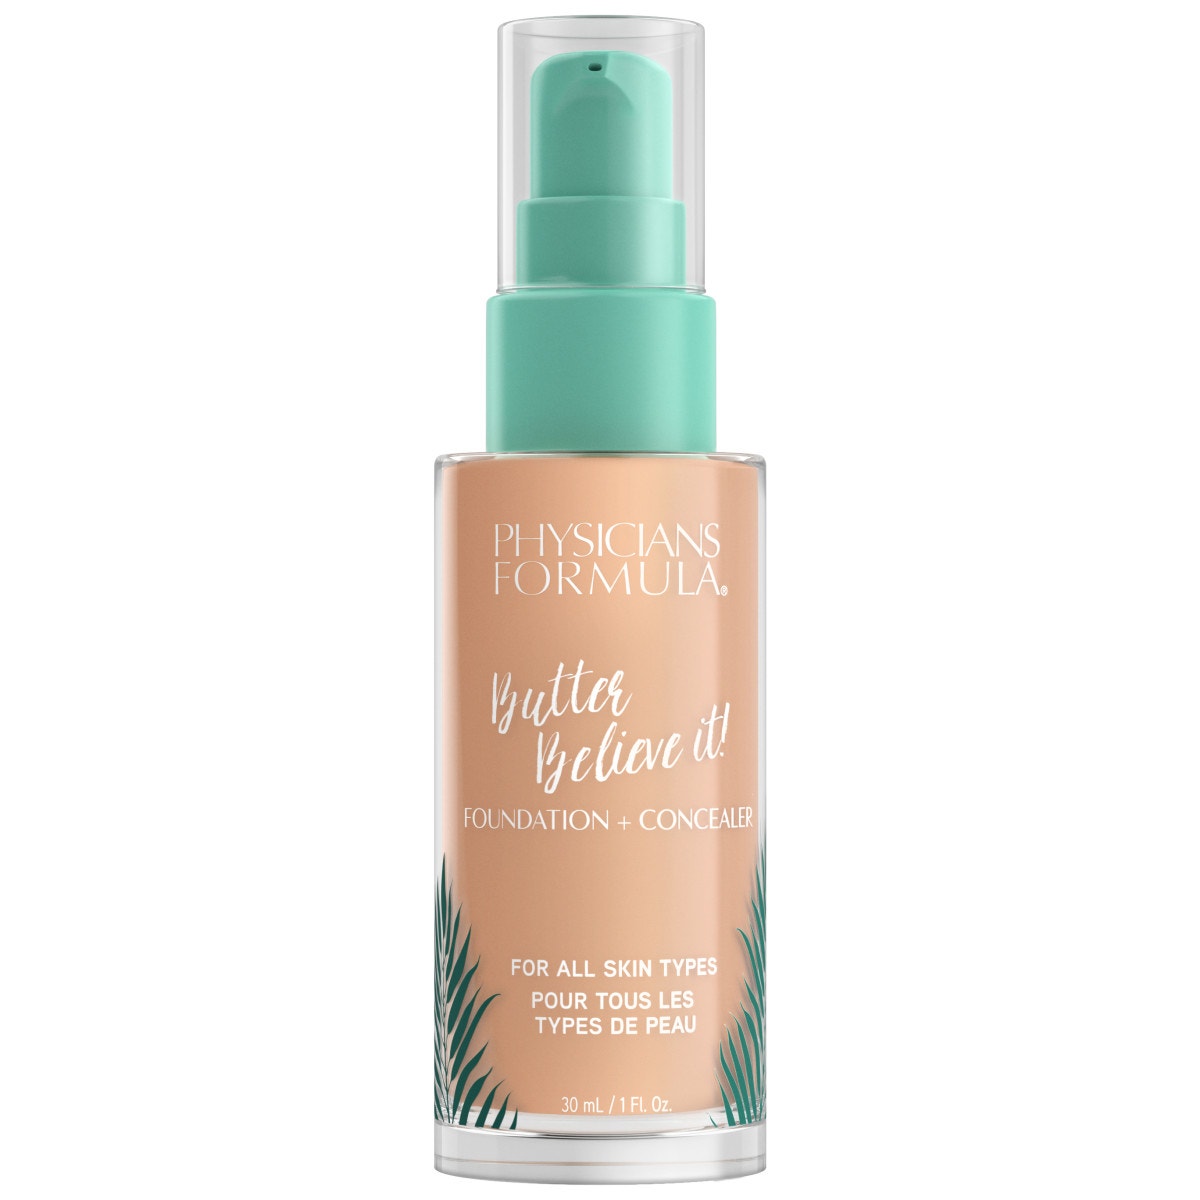 What foundations do you guys use? (for fair skin) looking for a